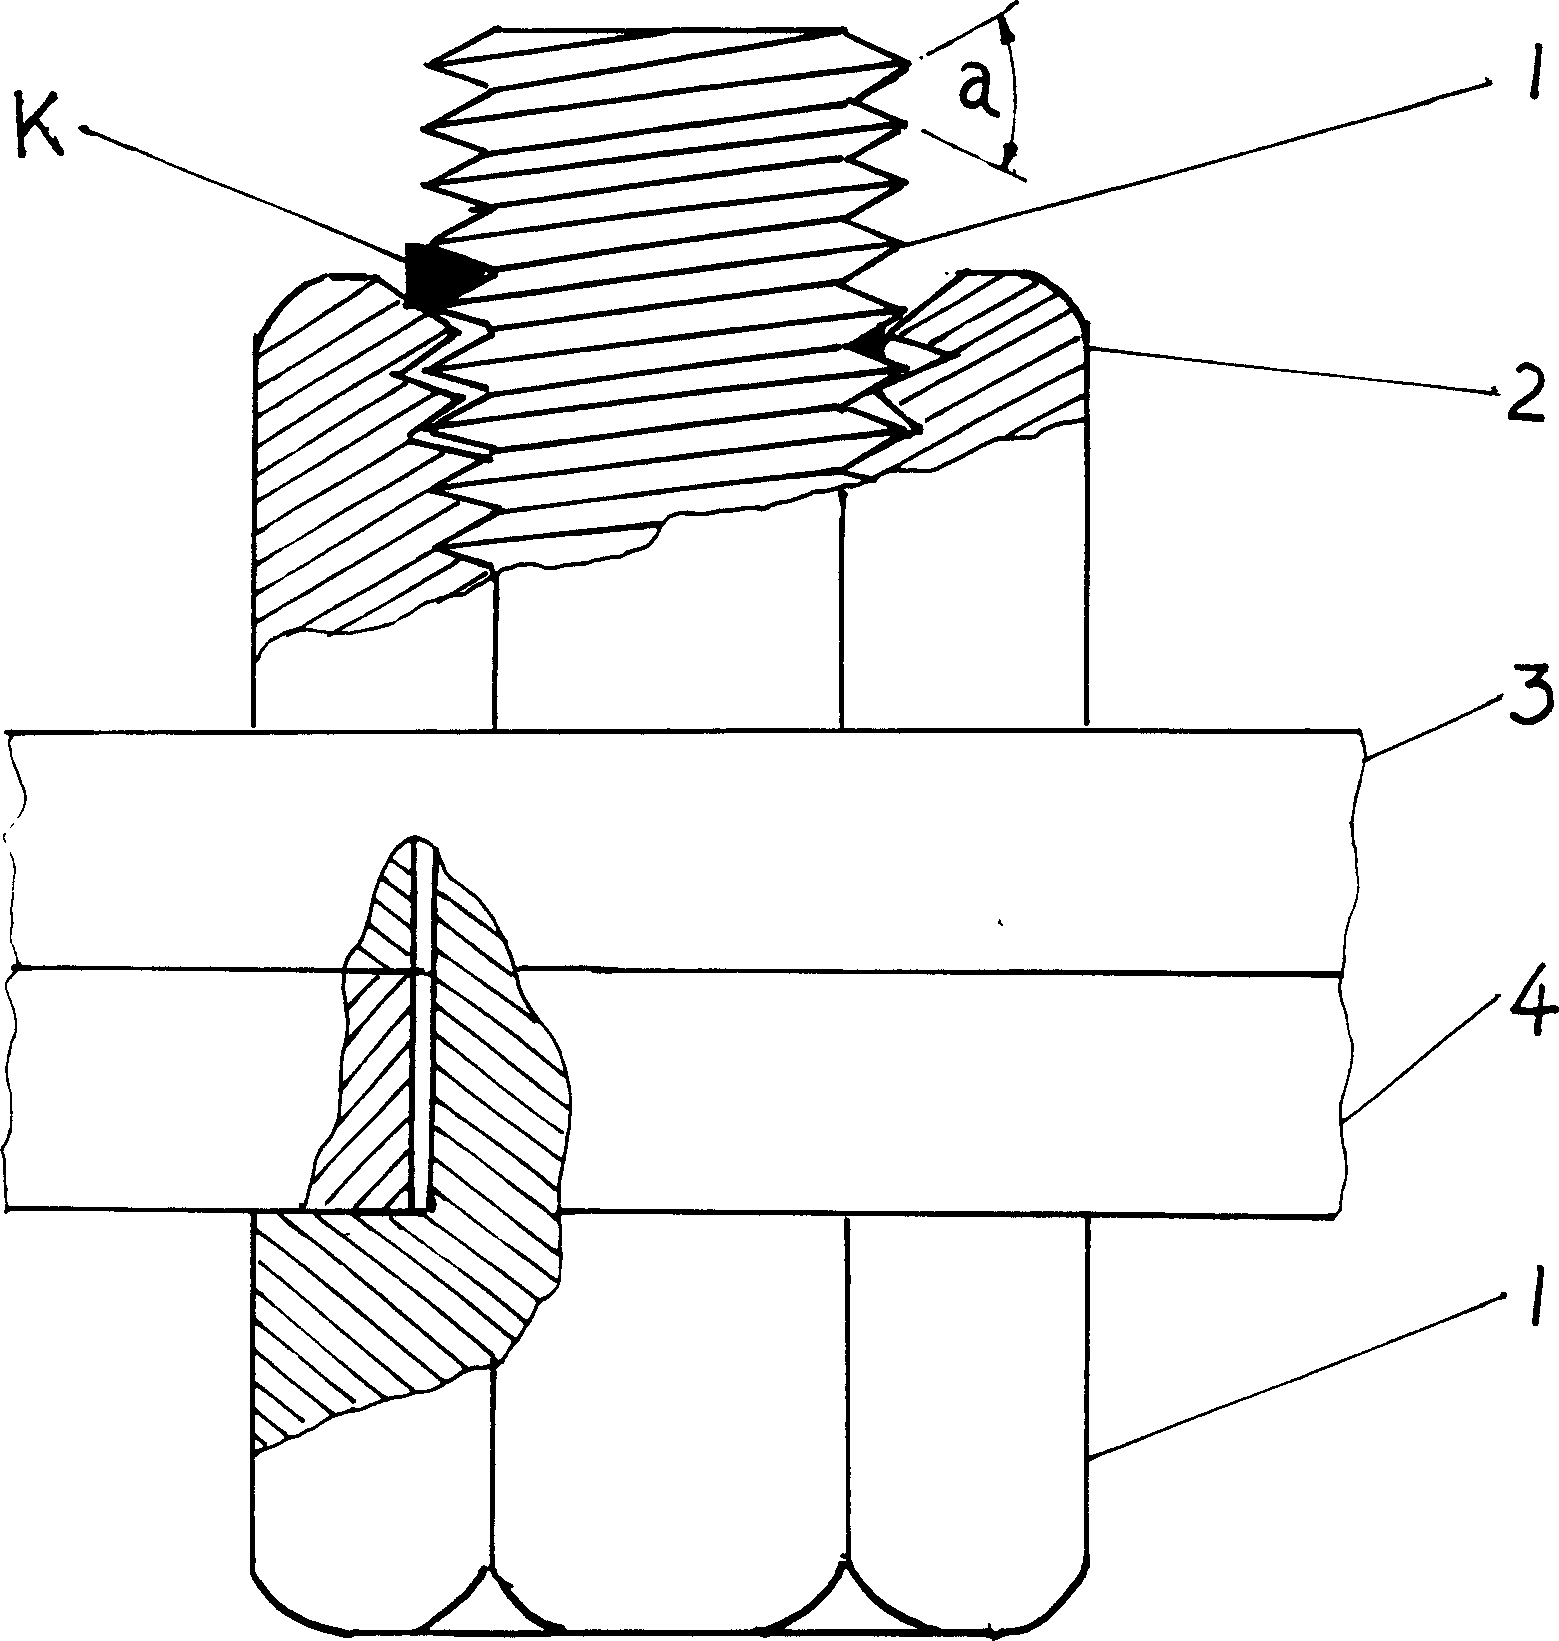 Screw module with rivet function matched with nut and slope back stop jump ring and using method